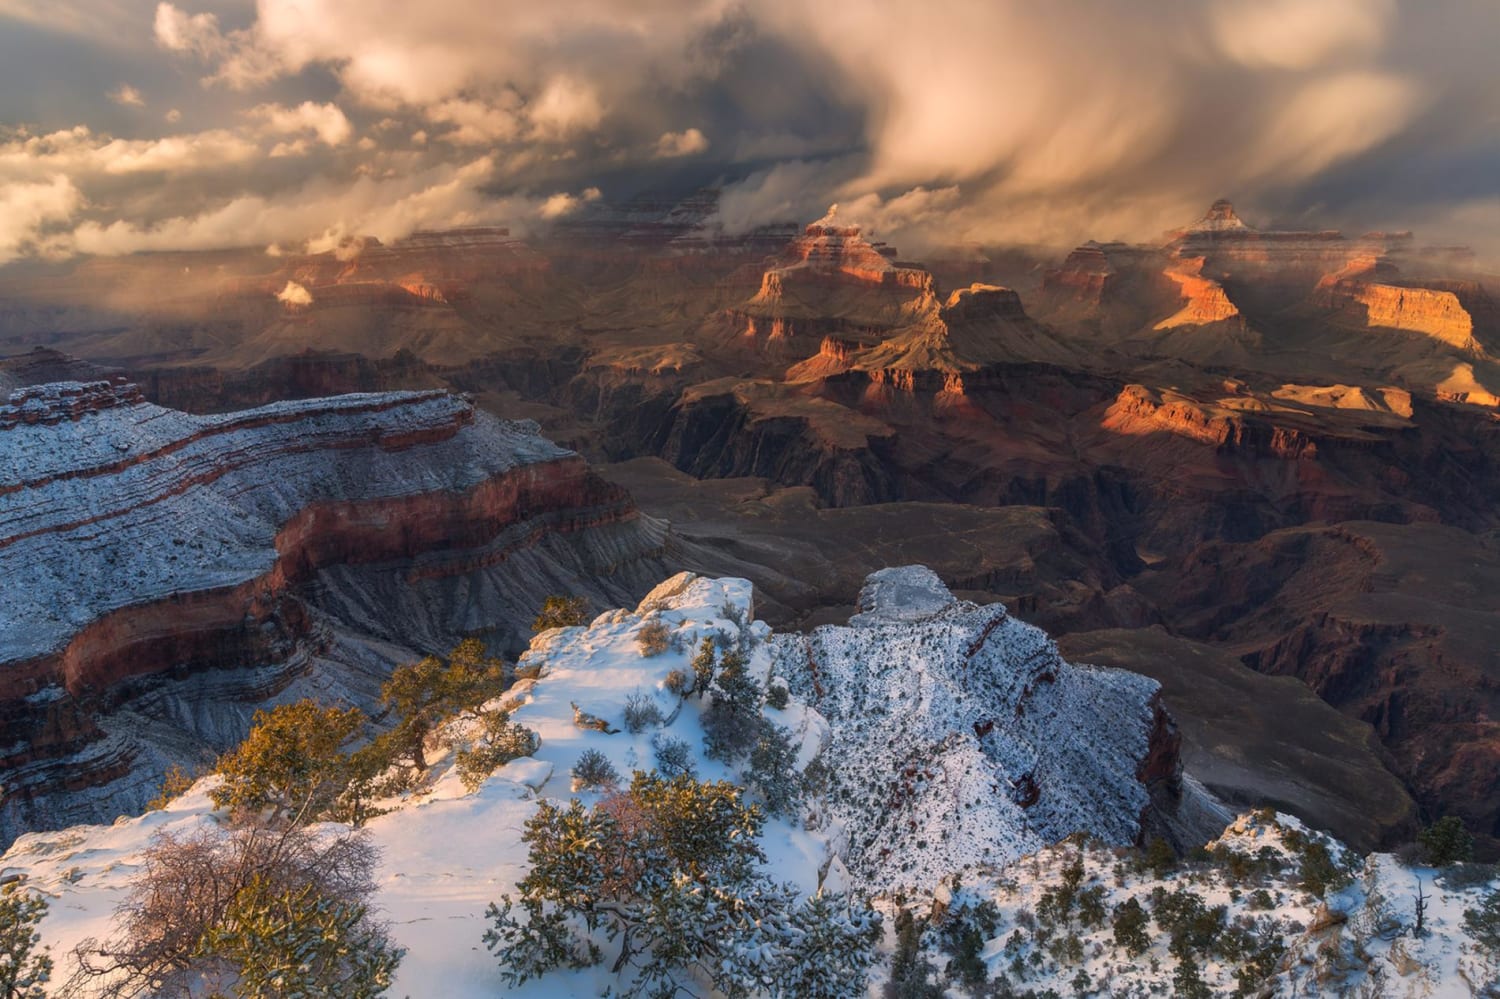 How to take an amazing photo of the Grand Canyon